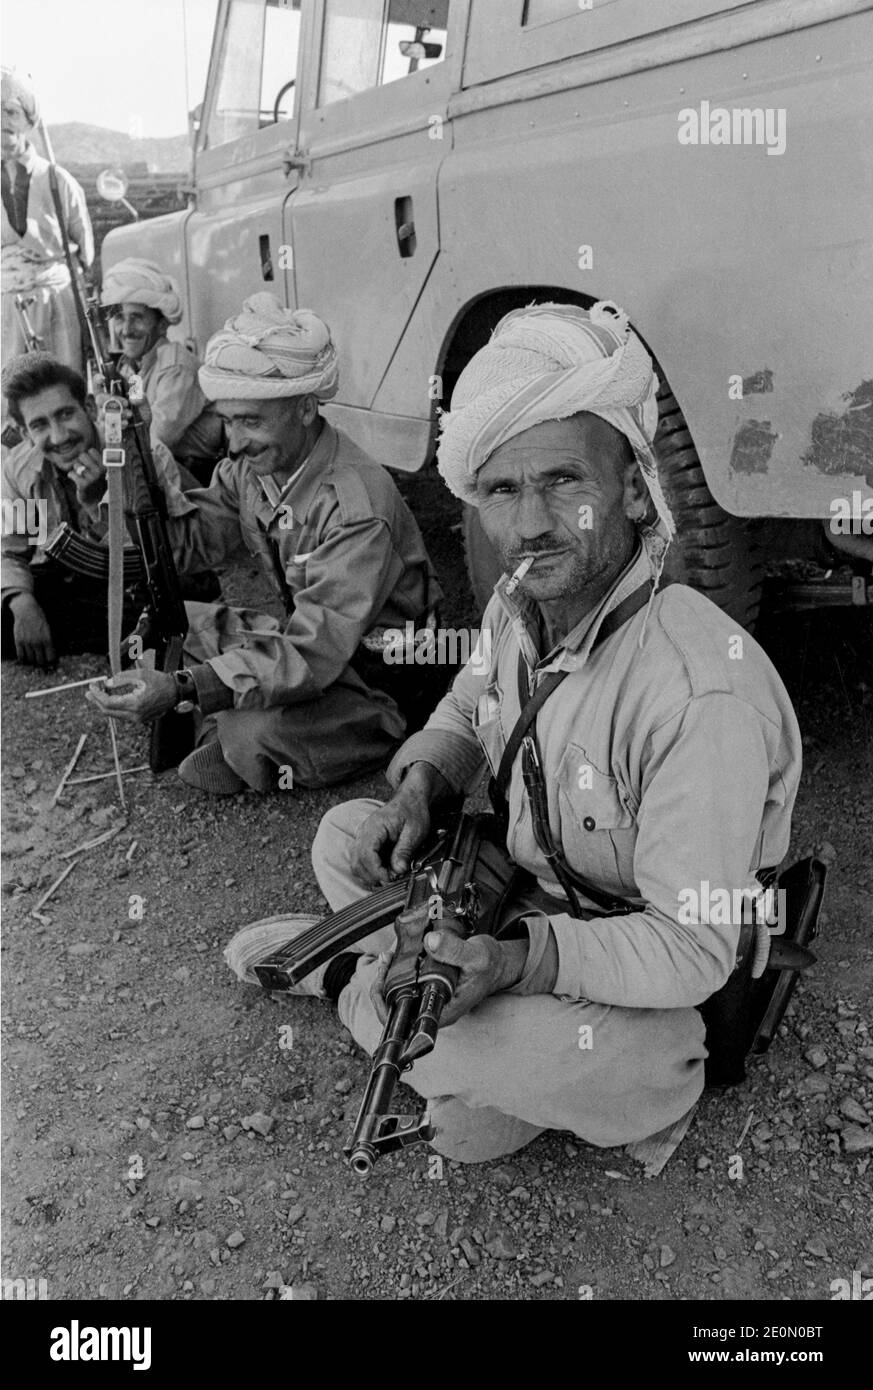 Rebel Kurdish, Peshmerga guerrillas in Northern Iraq photographed during a brief truce with Iraqi government forces 1968. Stock Photo